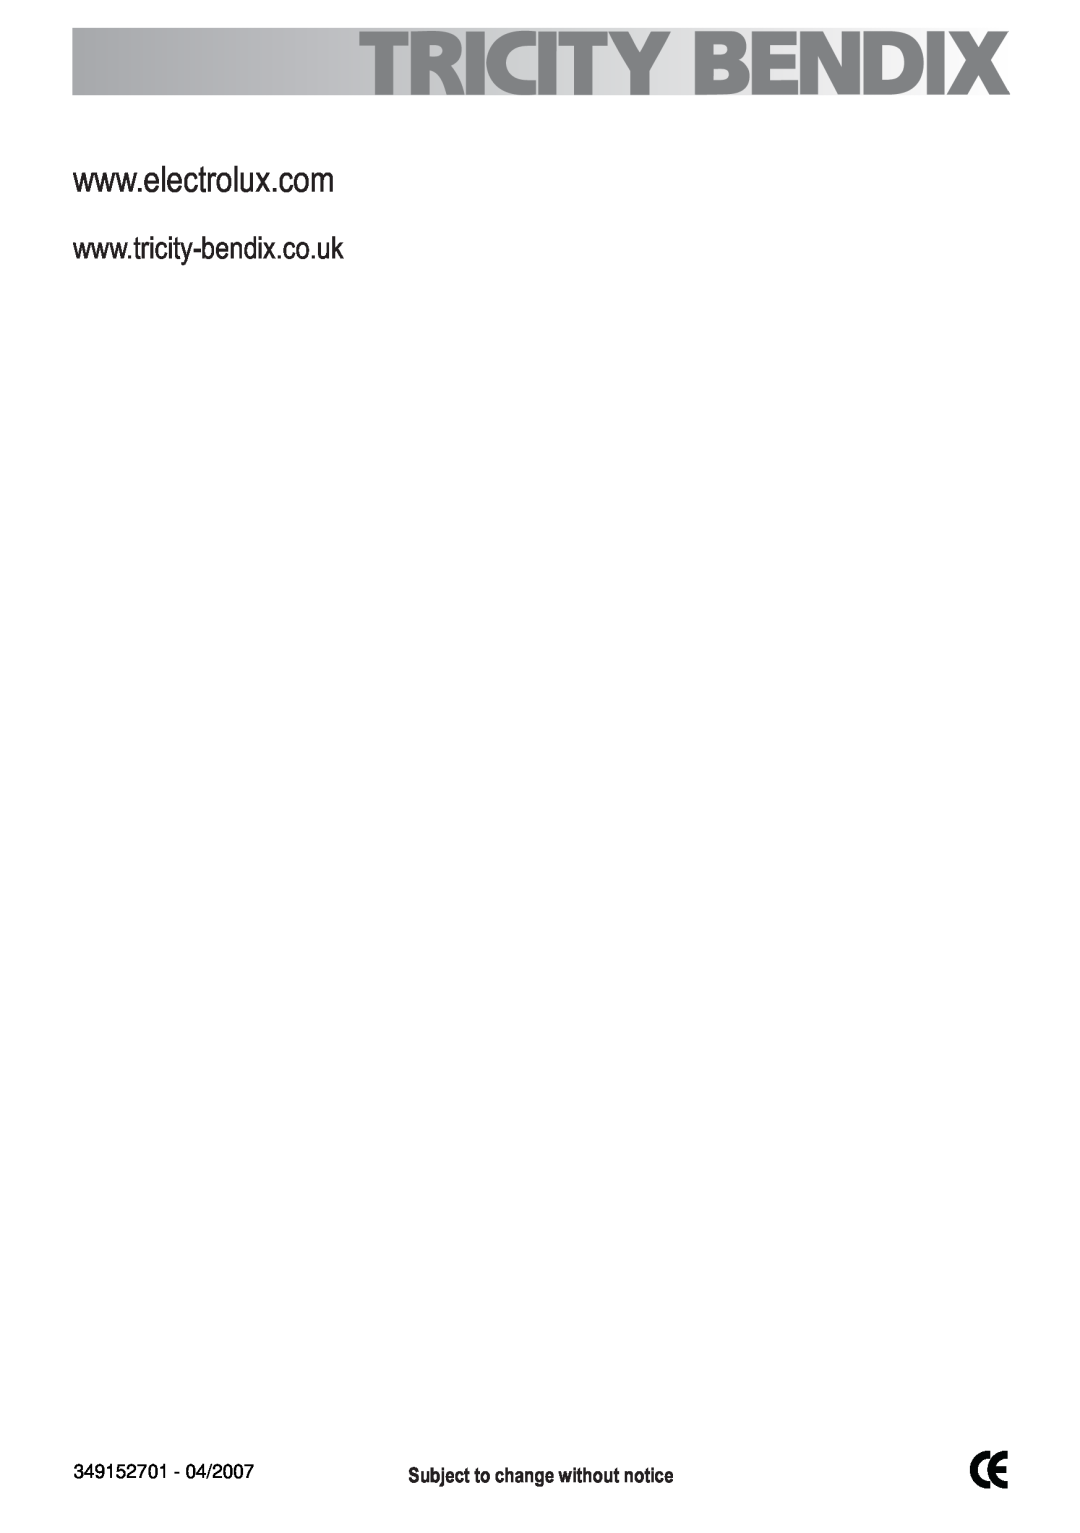 Tricity Bendix SE558 user manual 349152701 - 04/2007Subject to change without notice, 349152700 - 12/2006 